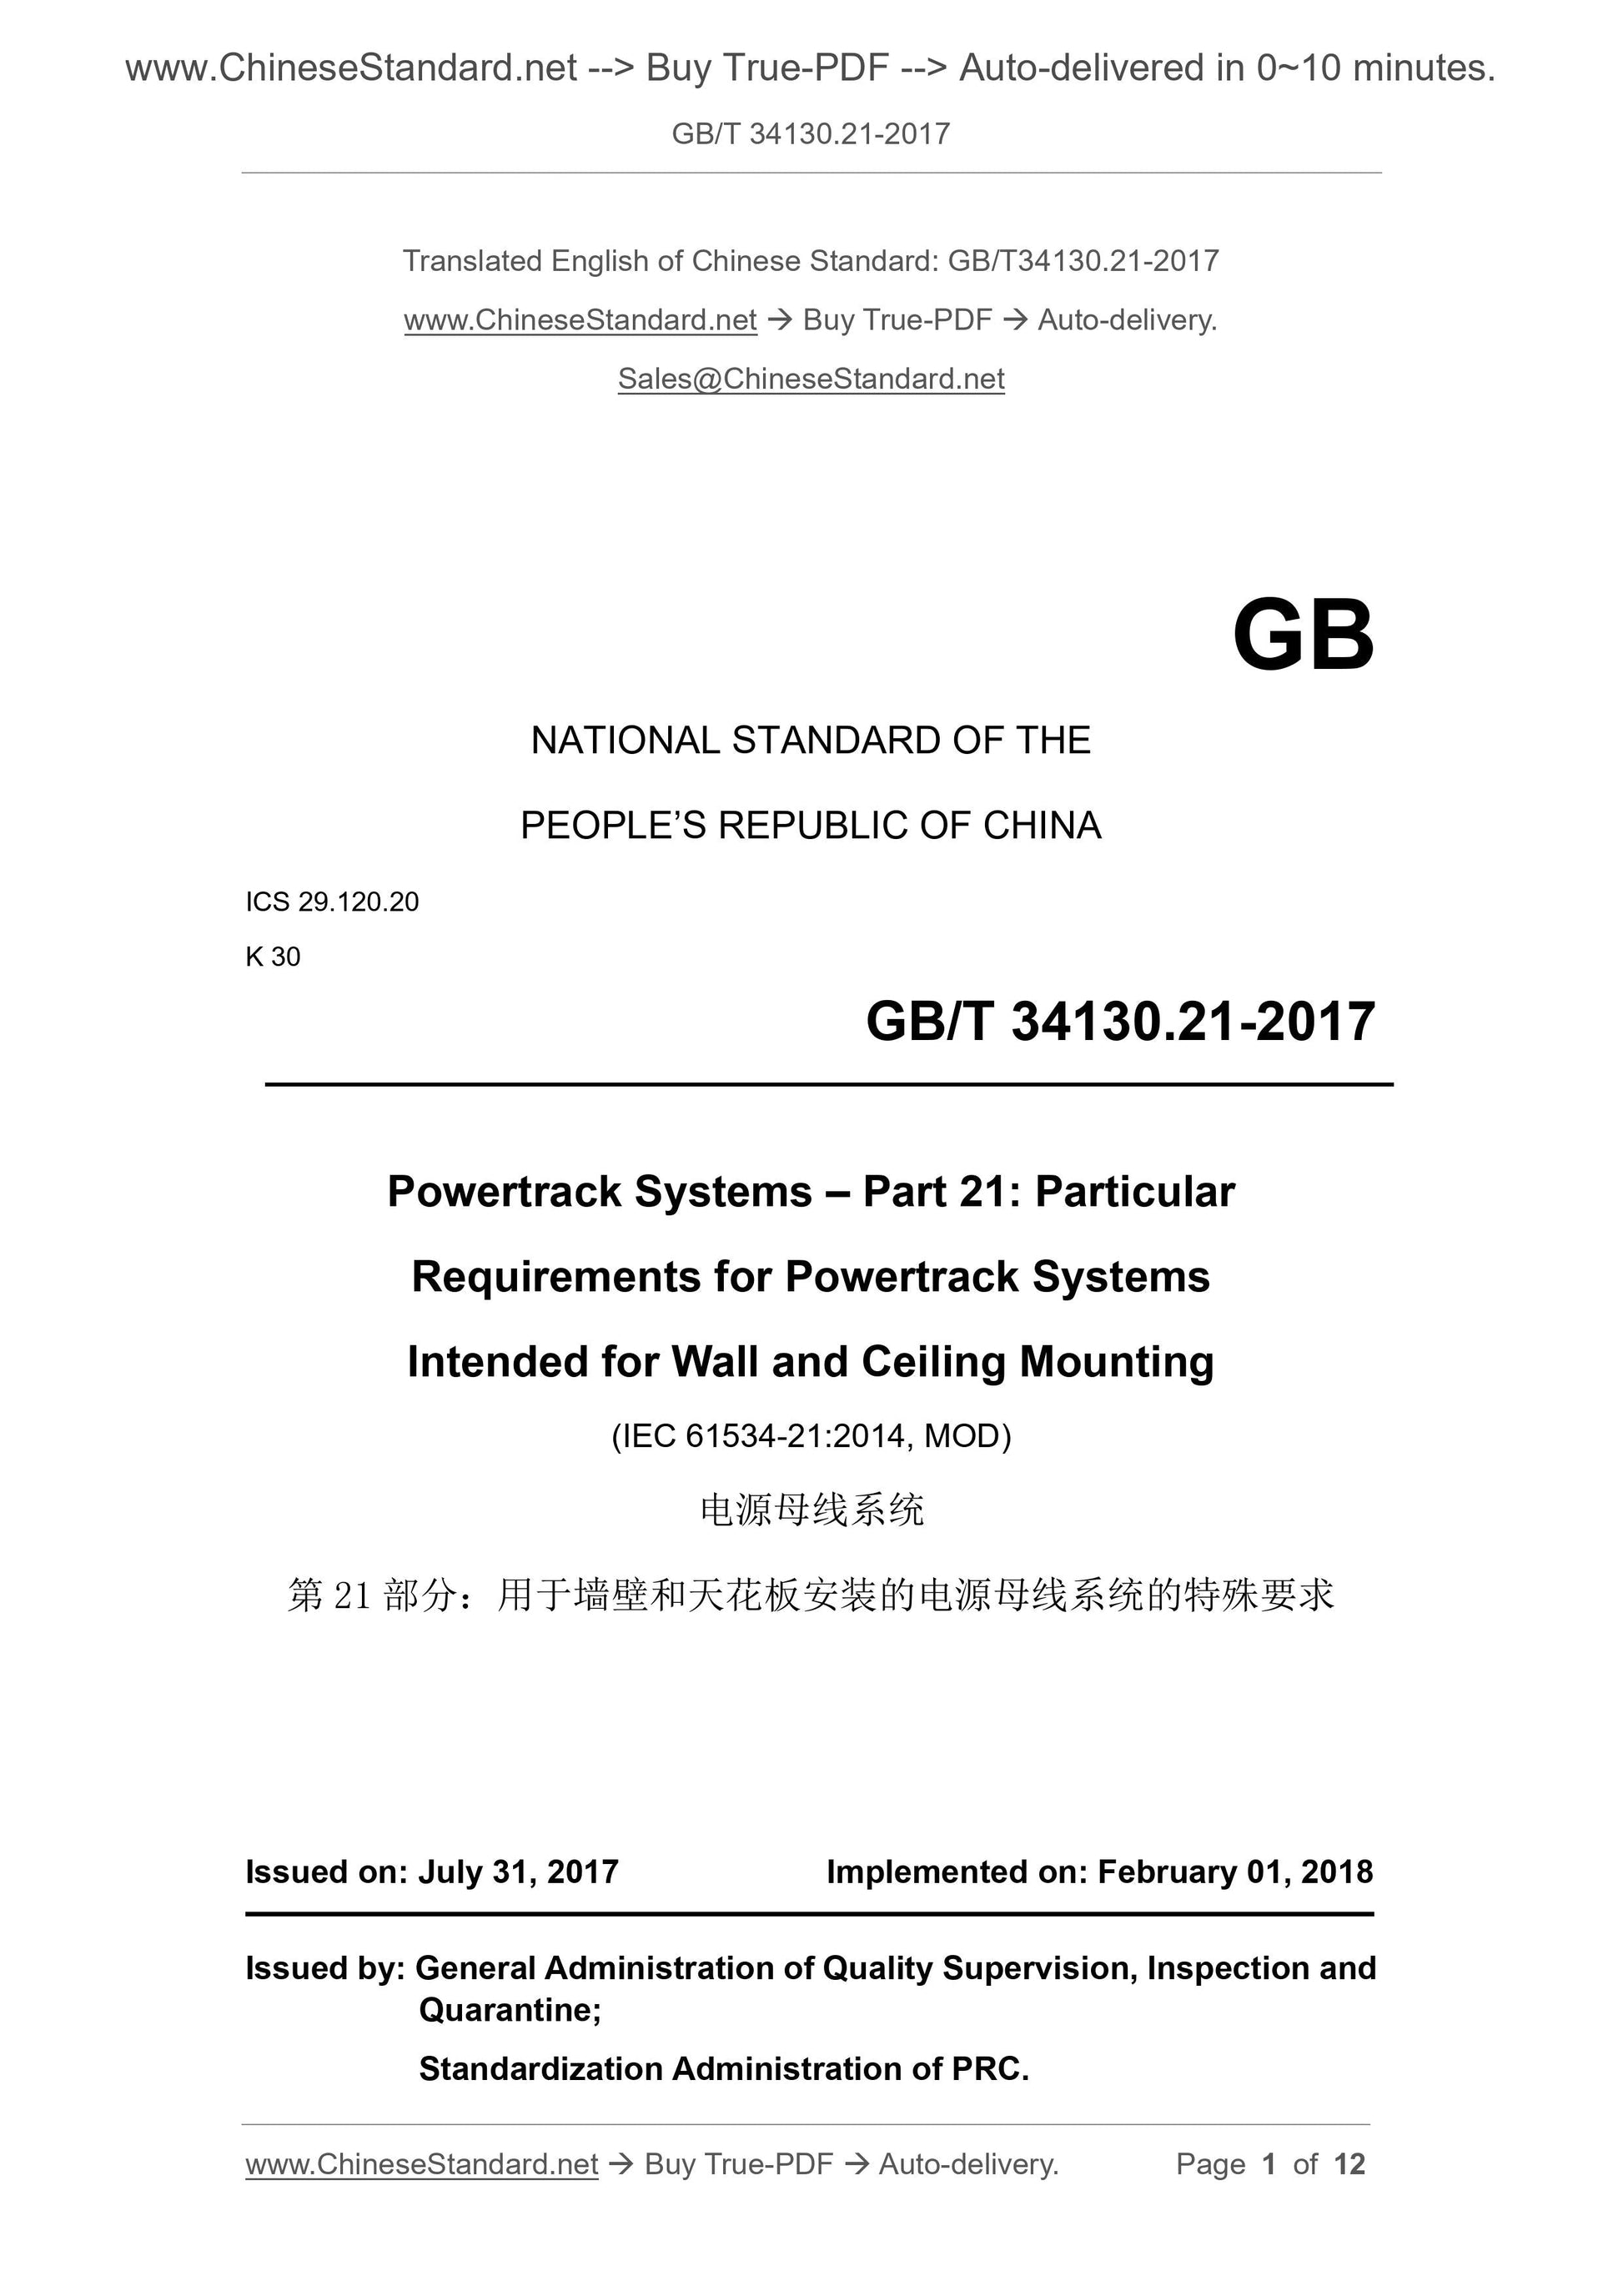 GB/T 34130.21-2017 Page 1